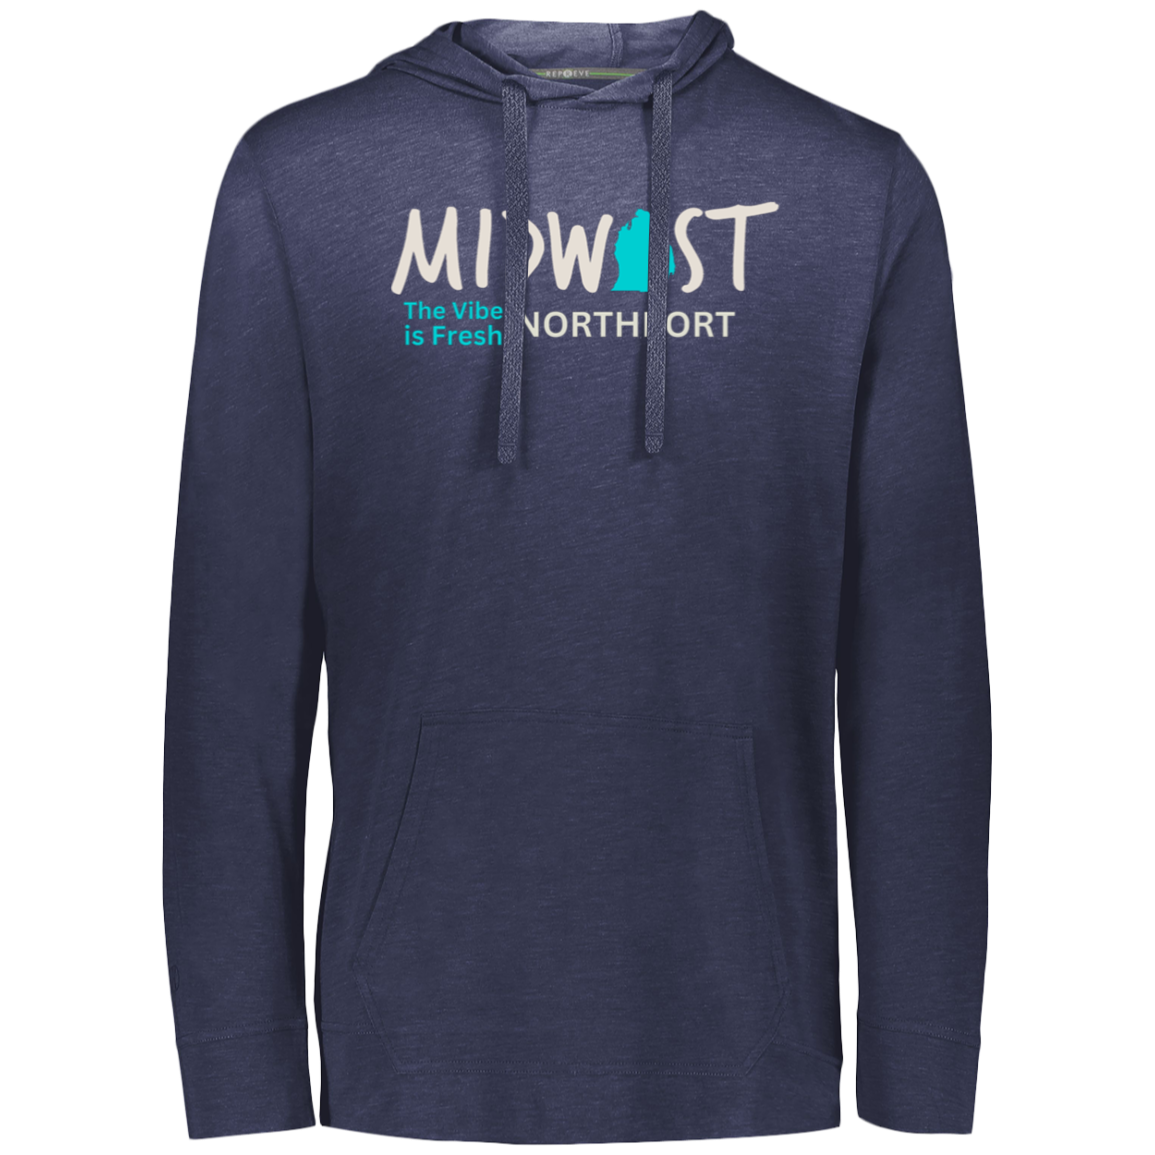 Midwest The Vibe is Fresh Northport Eco Lightweight Hoodie